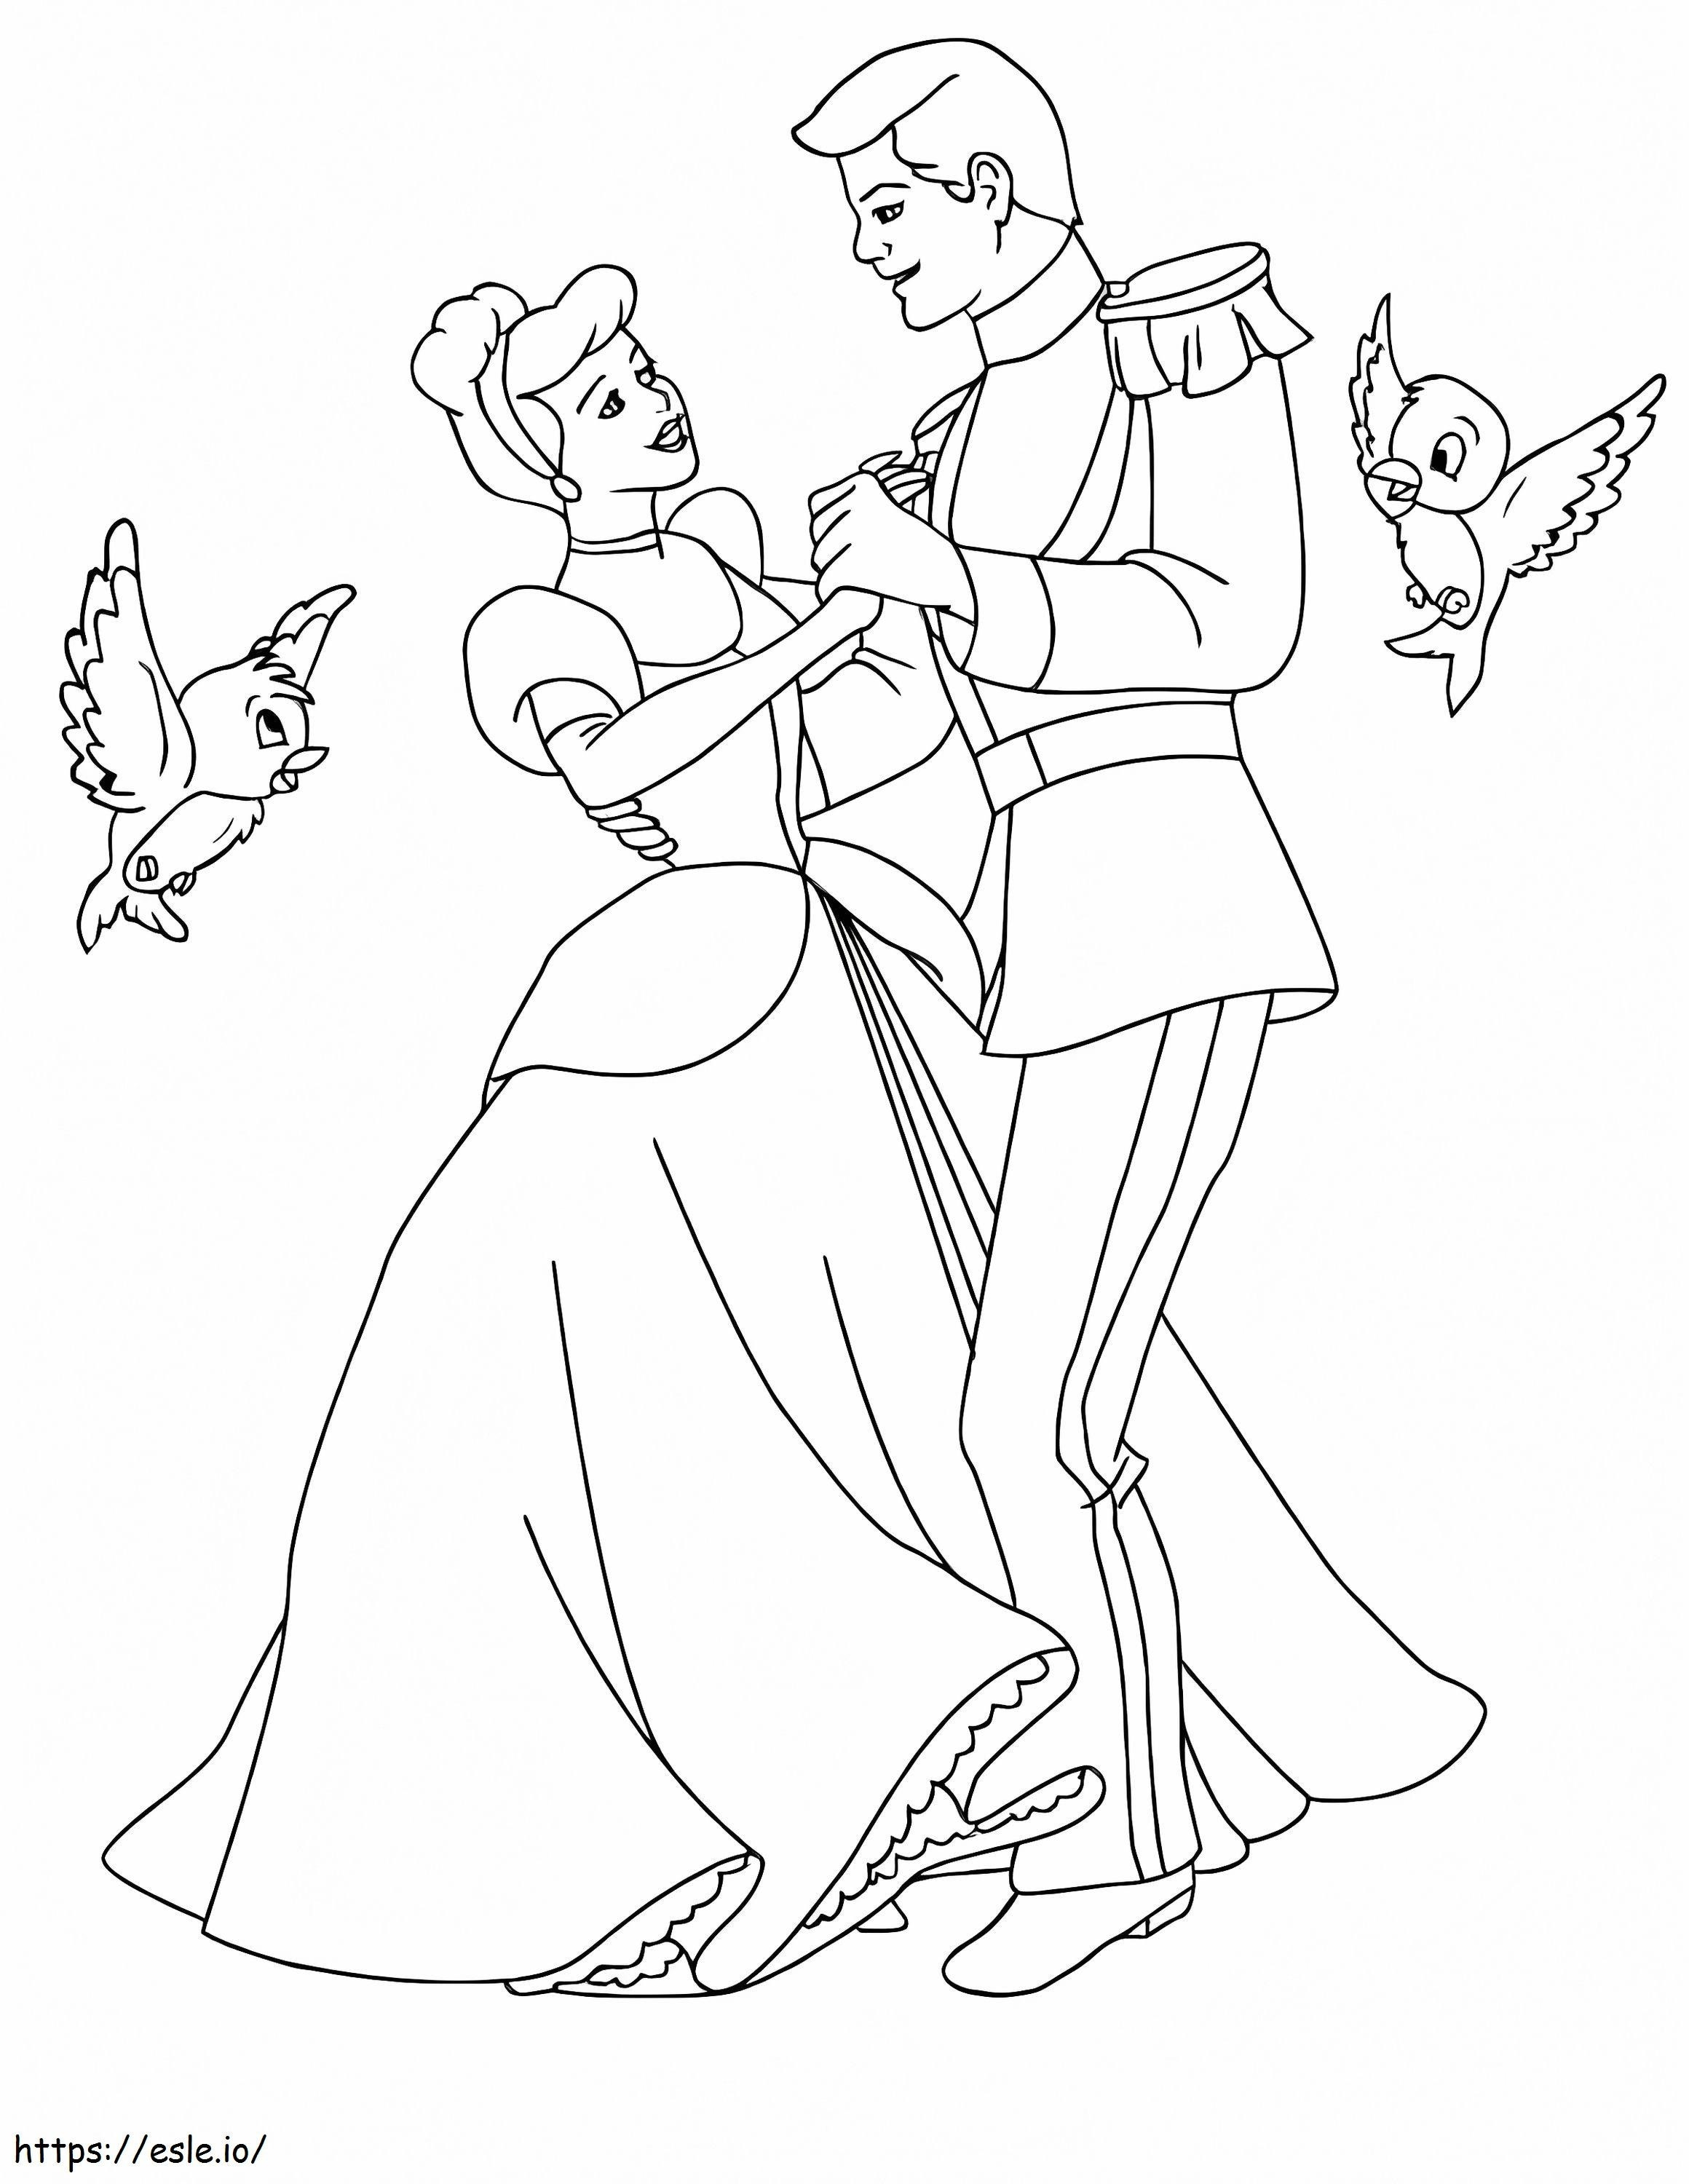 Cinderella And The Prince Dancing With Two Birds coloring page